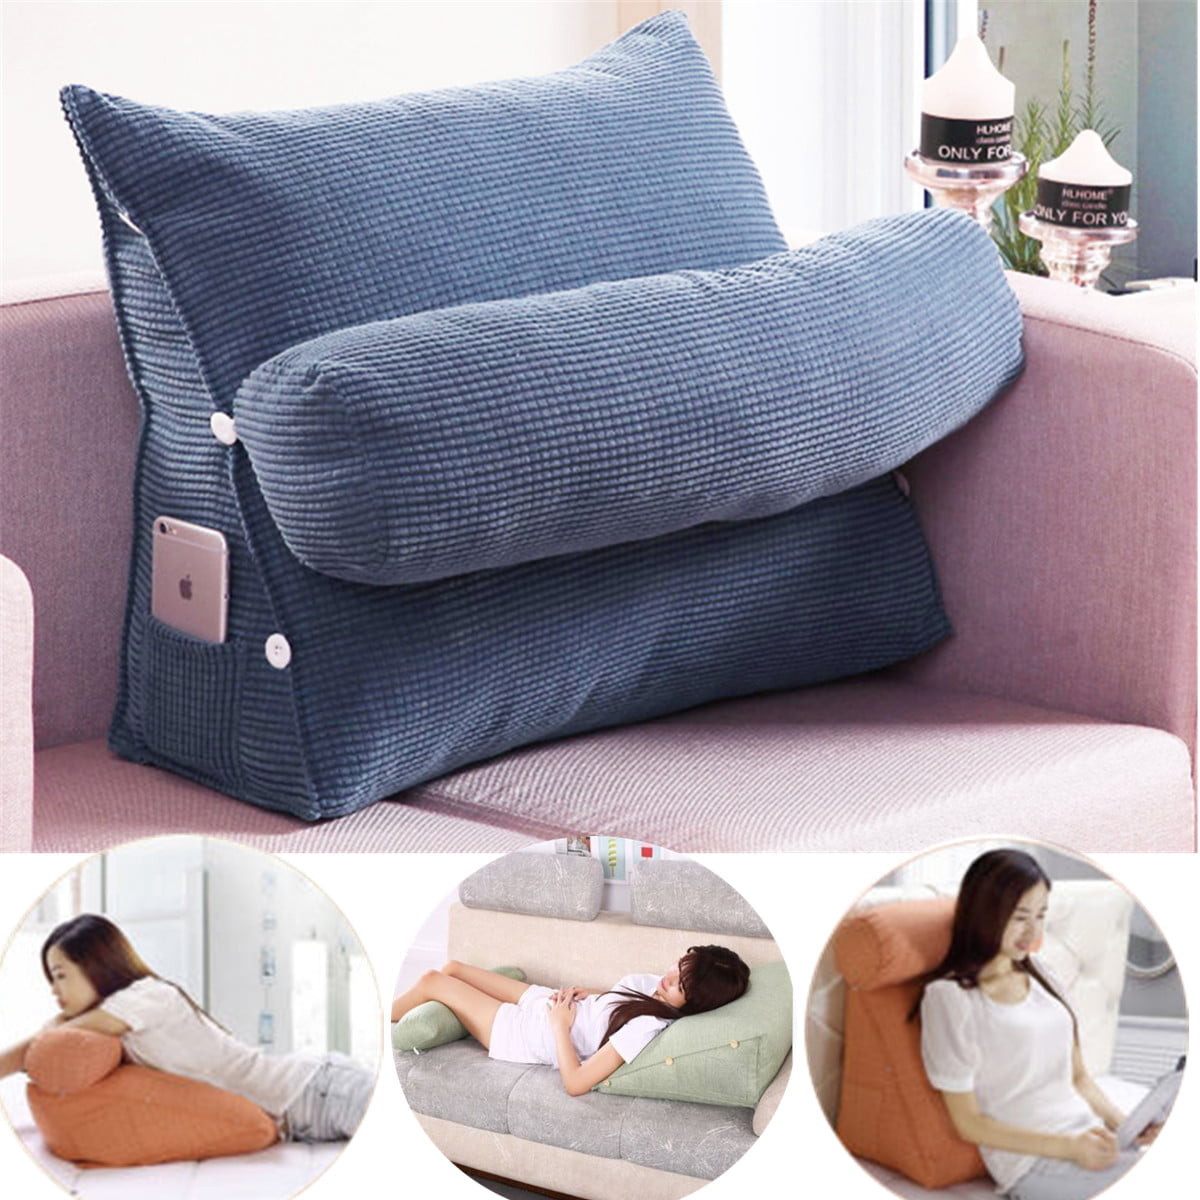 Adjustable Cotton Back Wedge Cushion Office Sofa Bed Chair Rest Neck Fip Support 